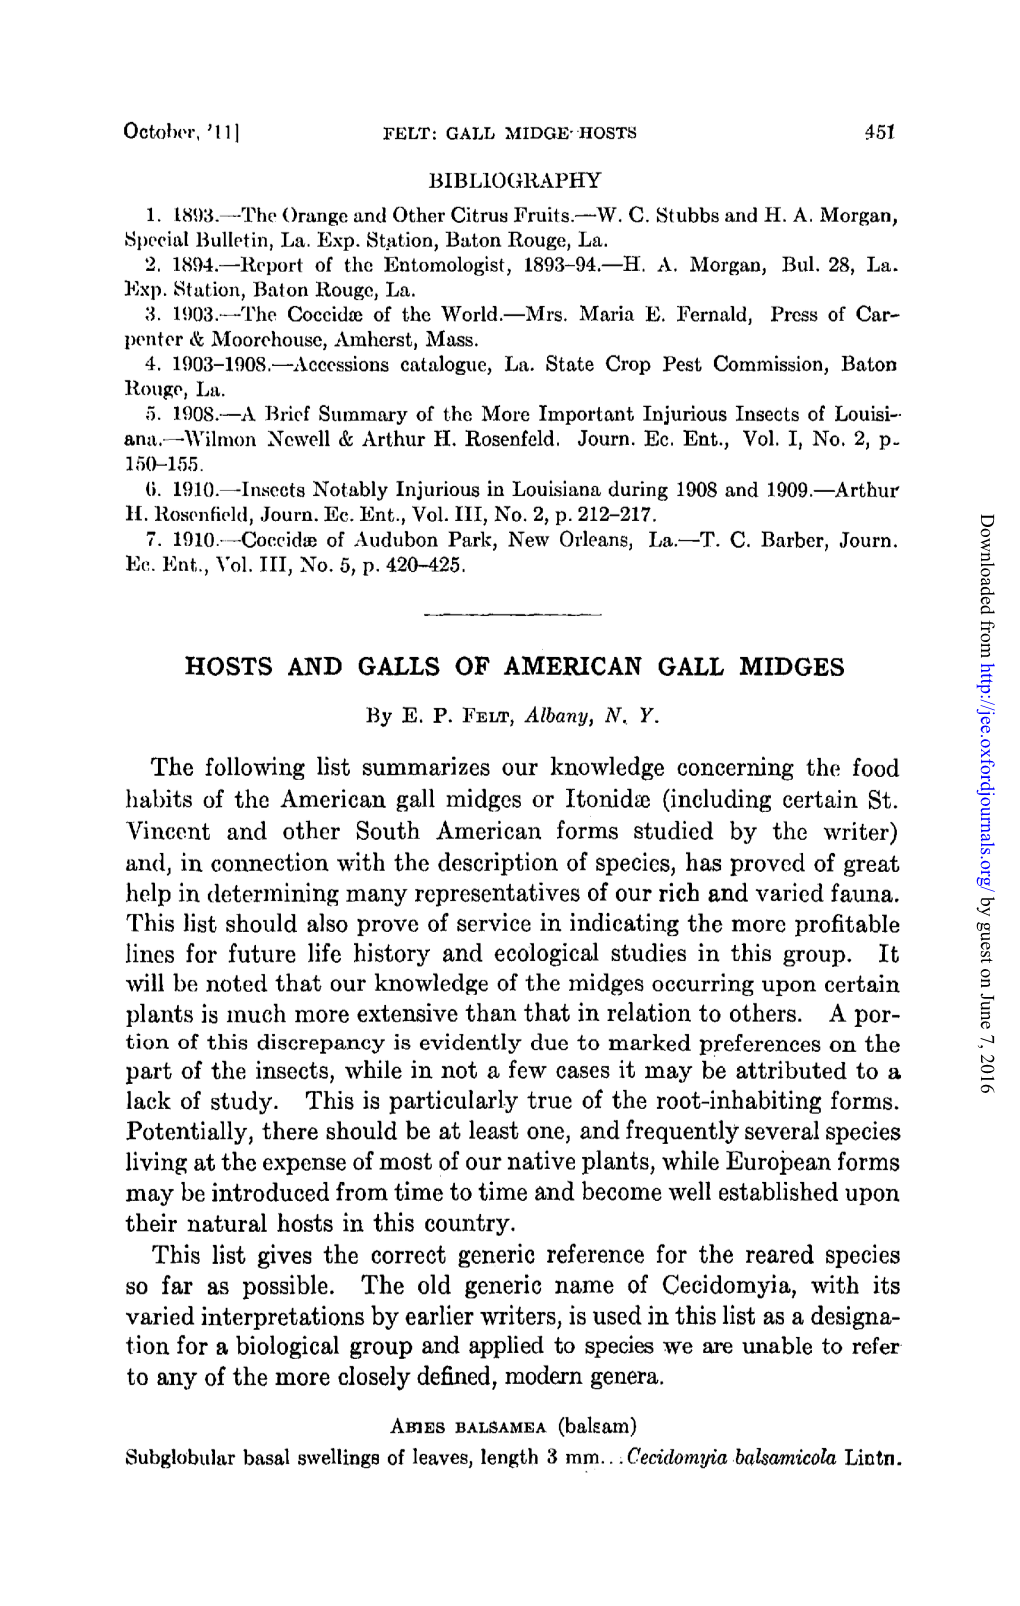 Hosts and Galls of American Gall Midges